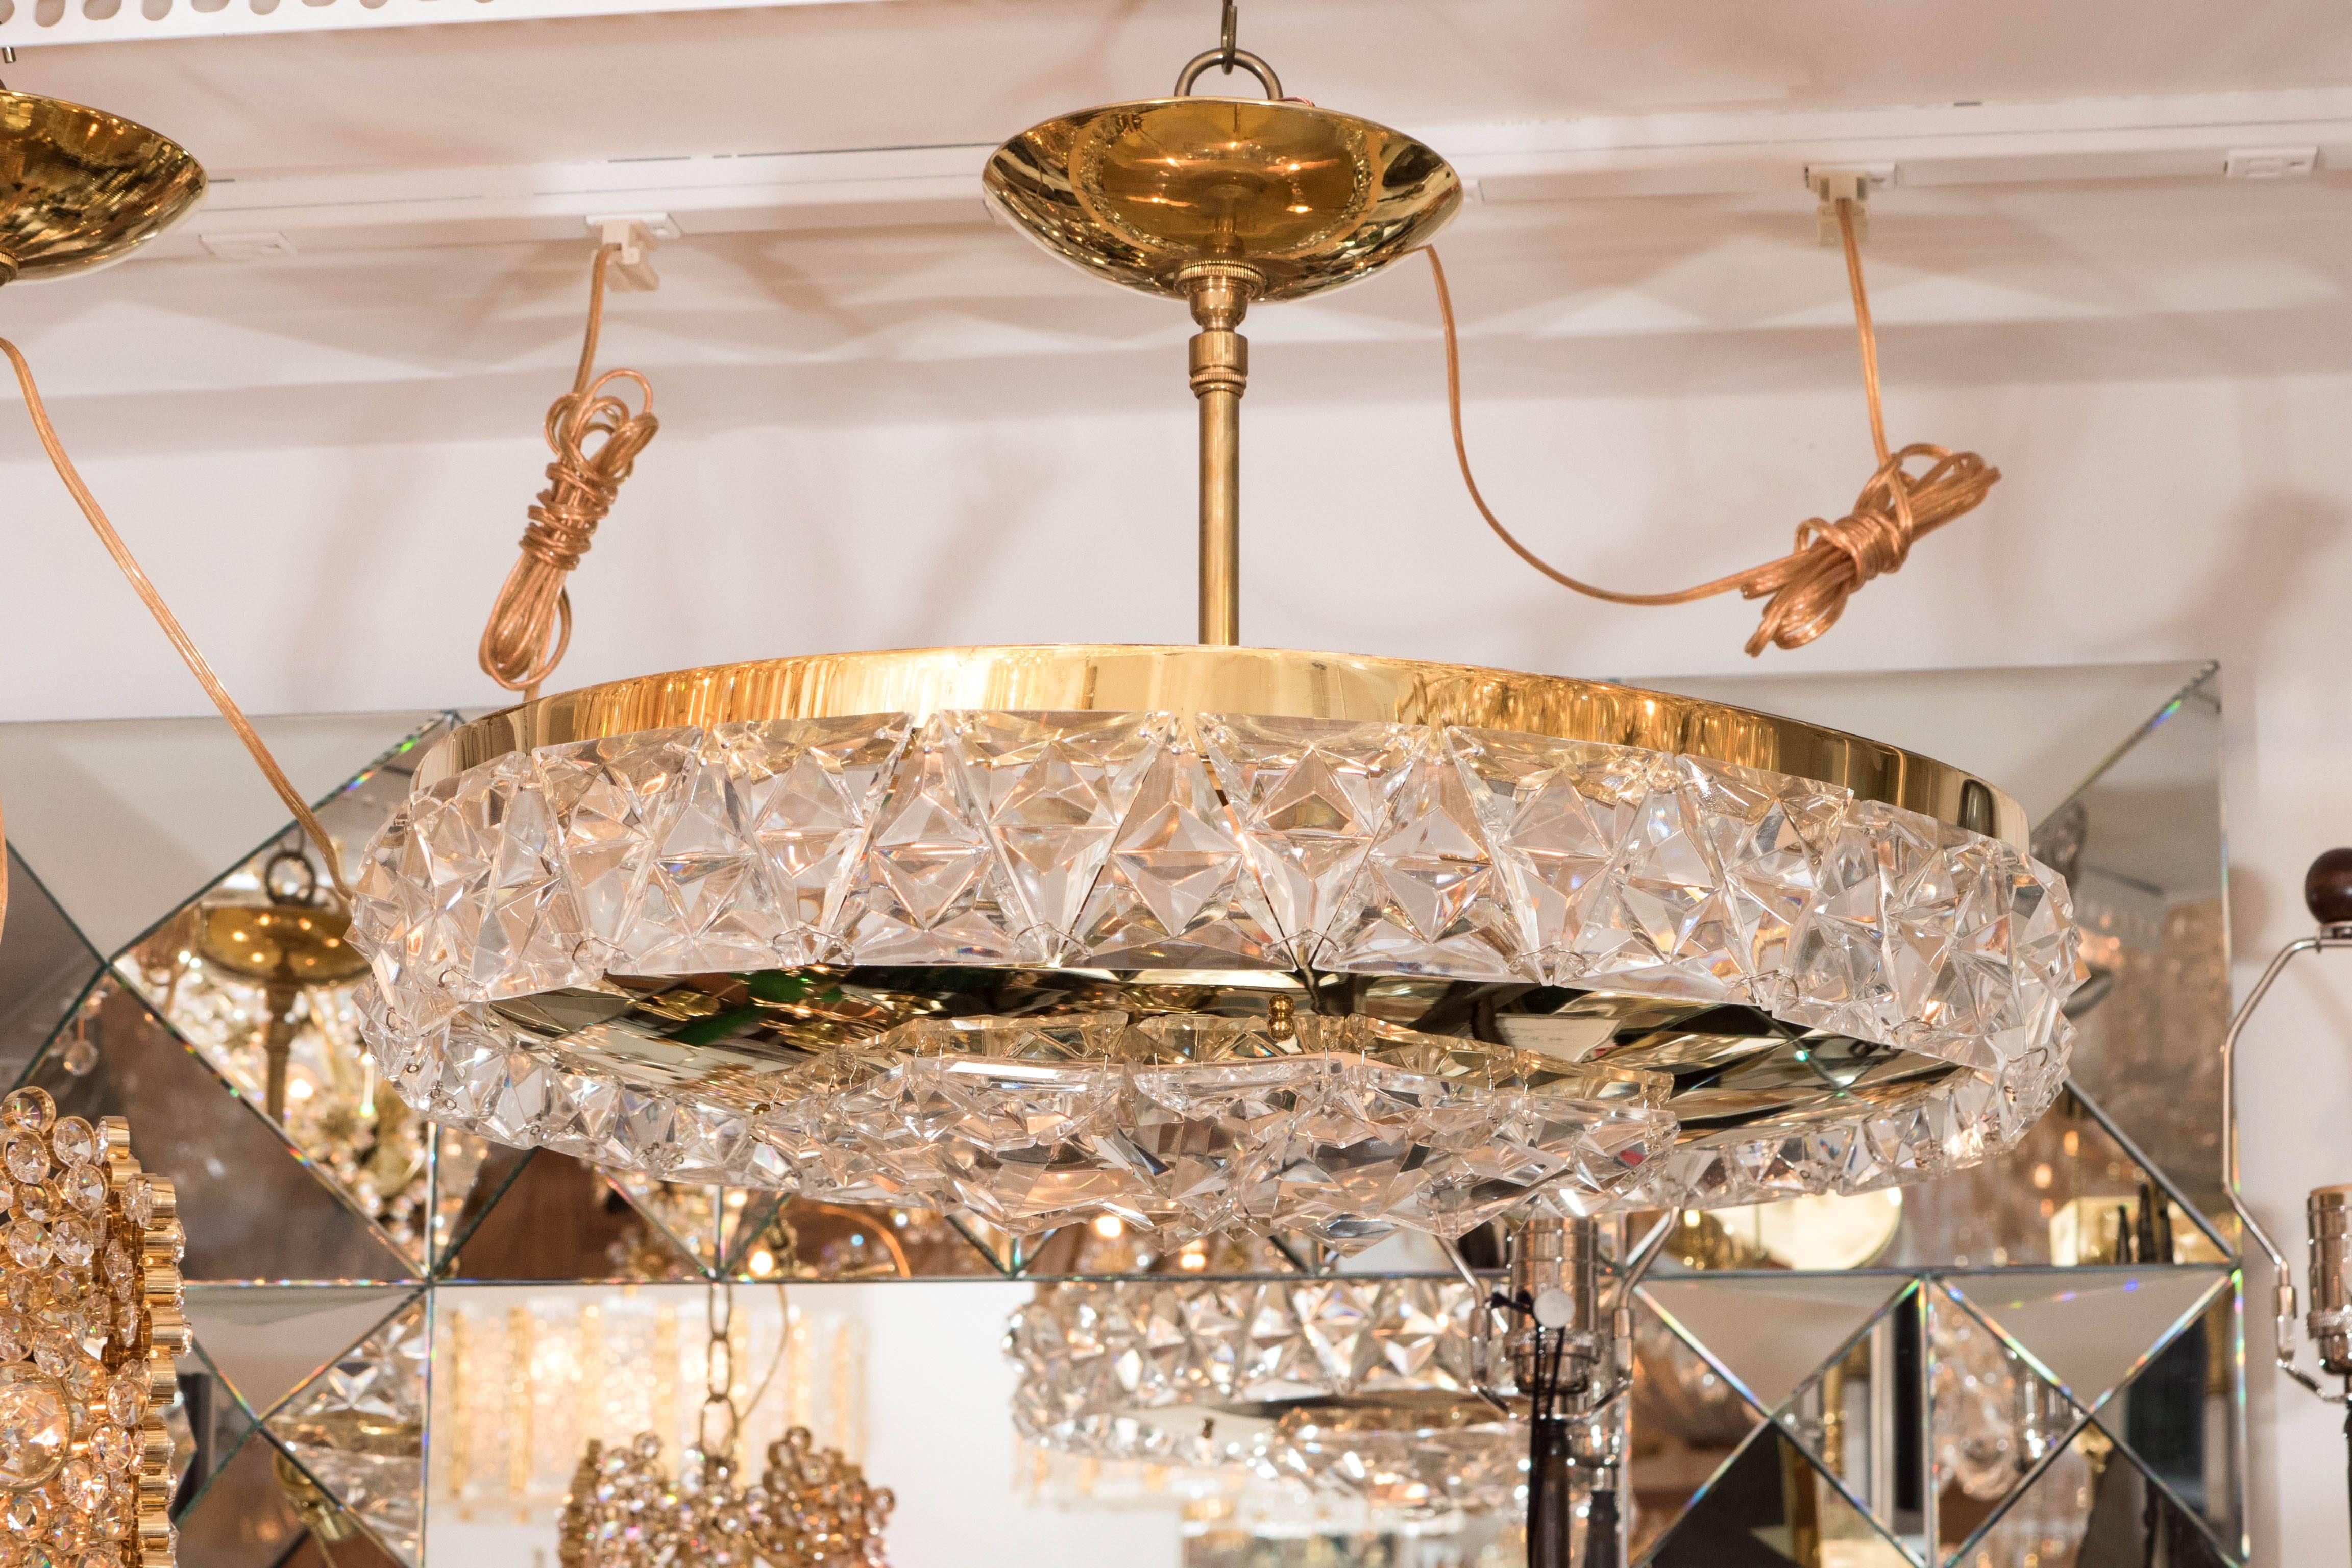 Round, polished brass ceiling fixture featuring a facet cut crystal element surround.